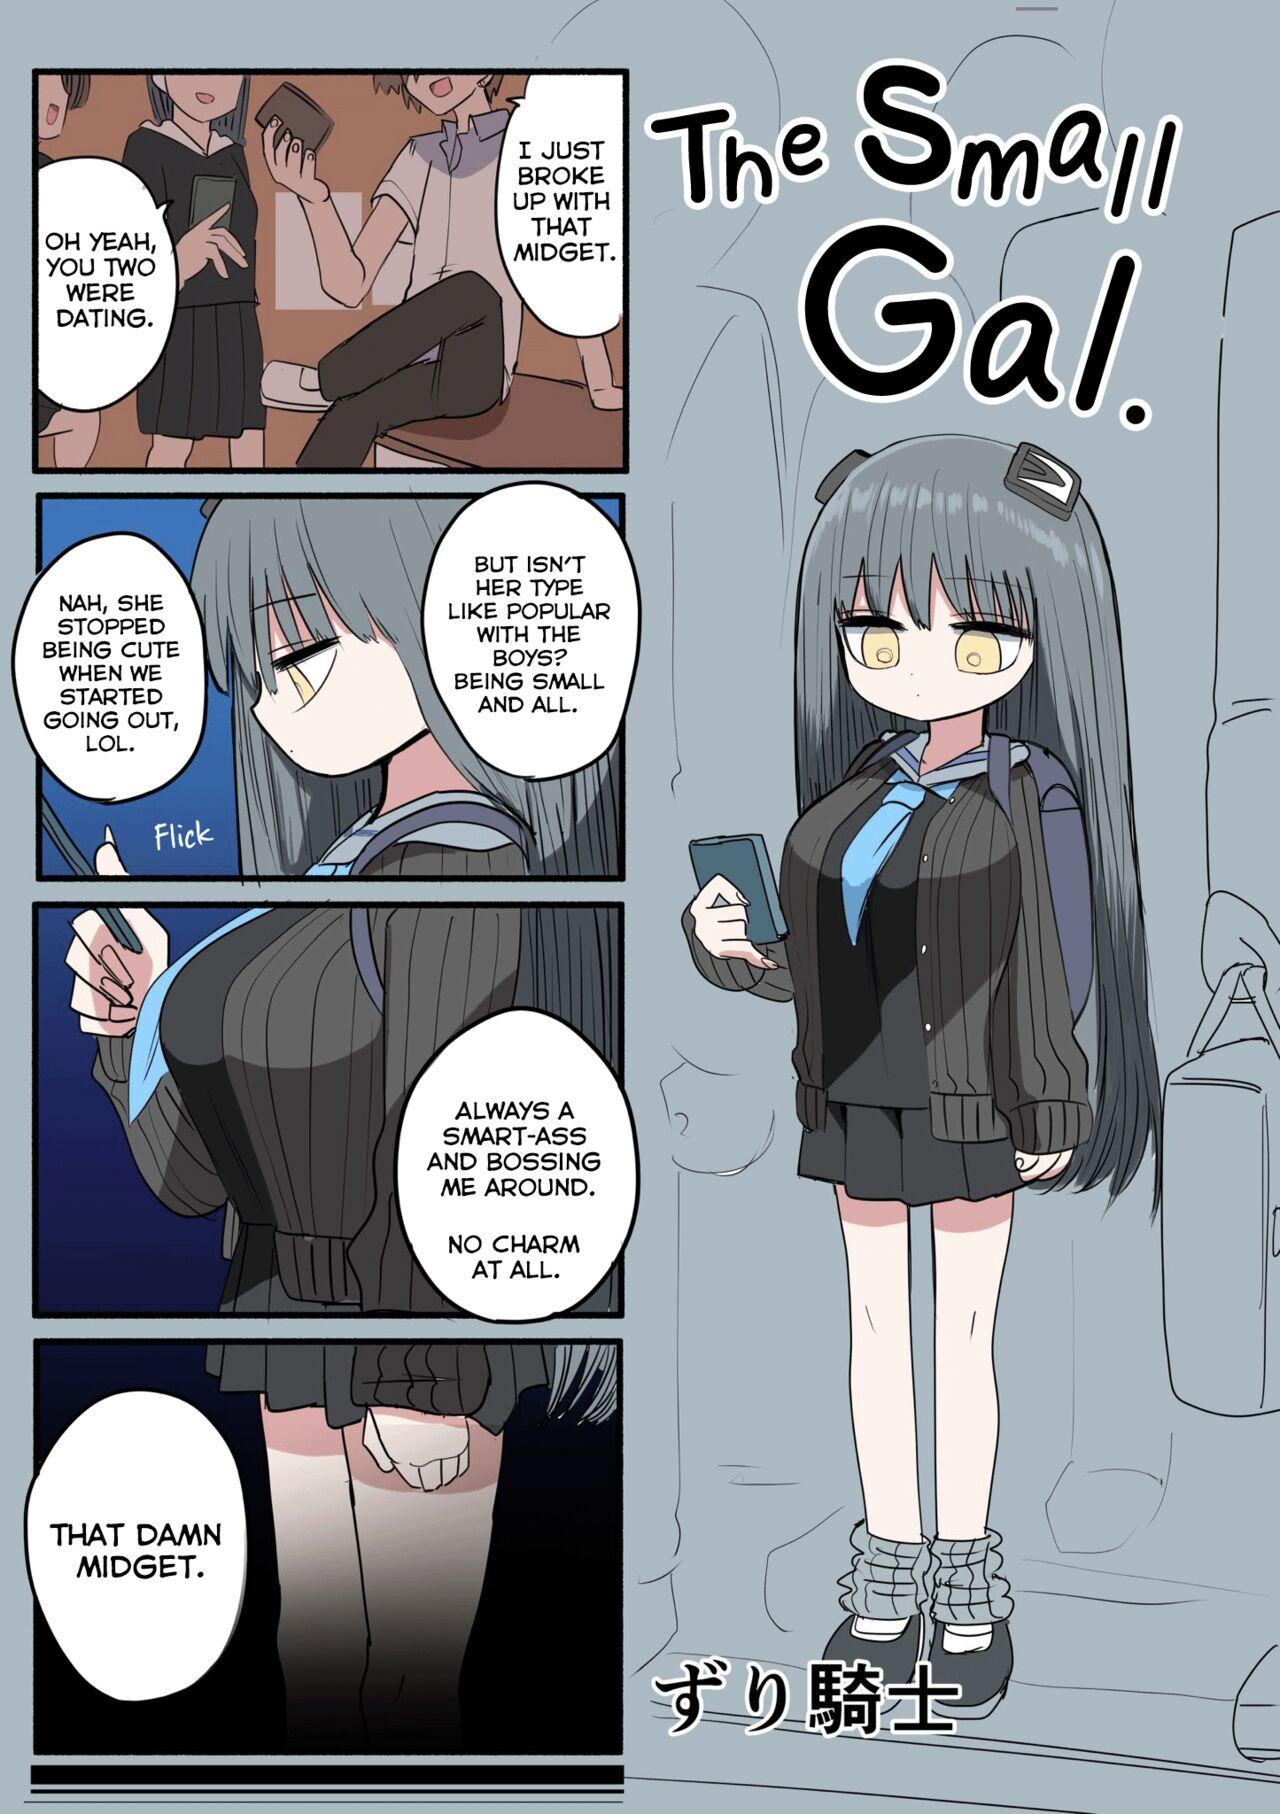 Chiisai Gal | The Small Gal 45